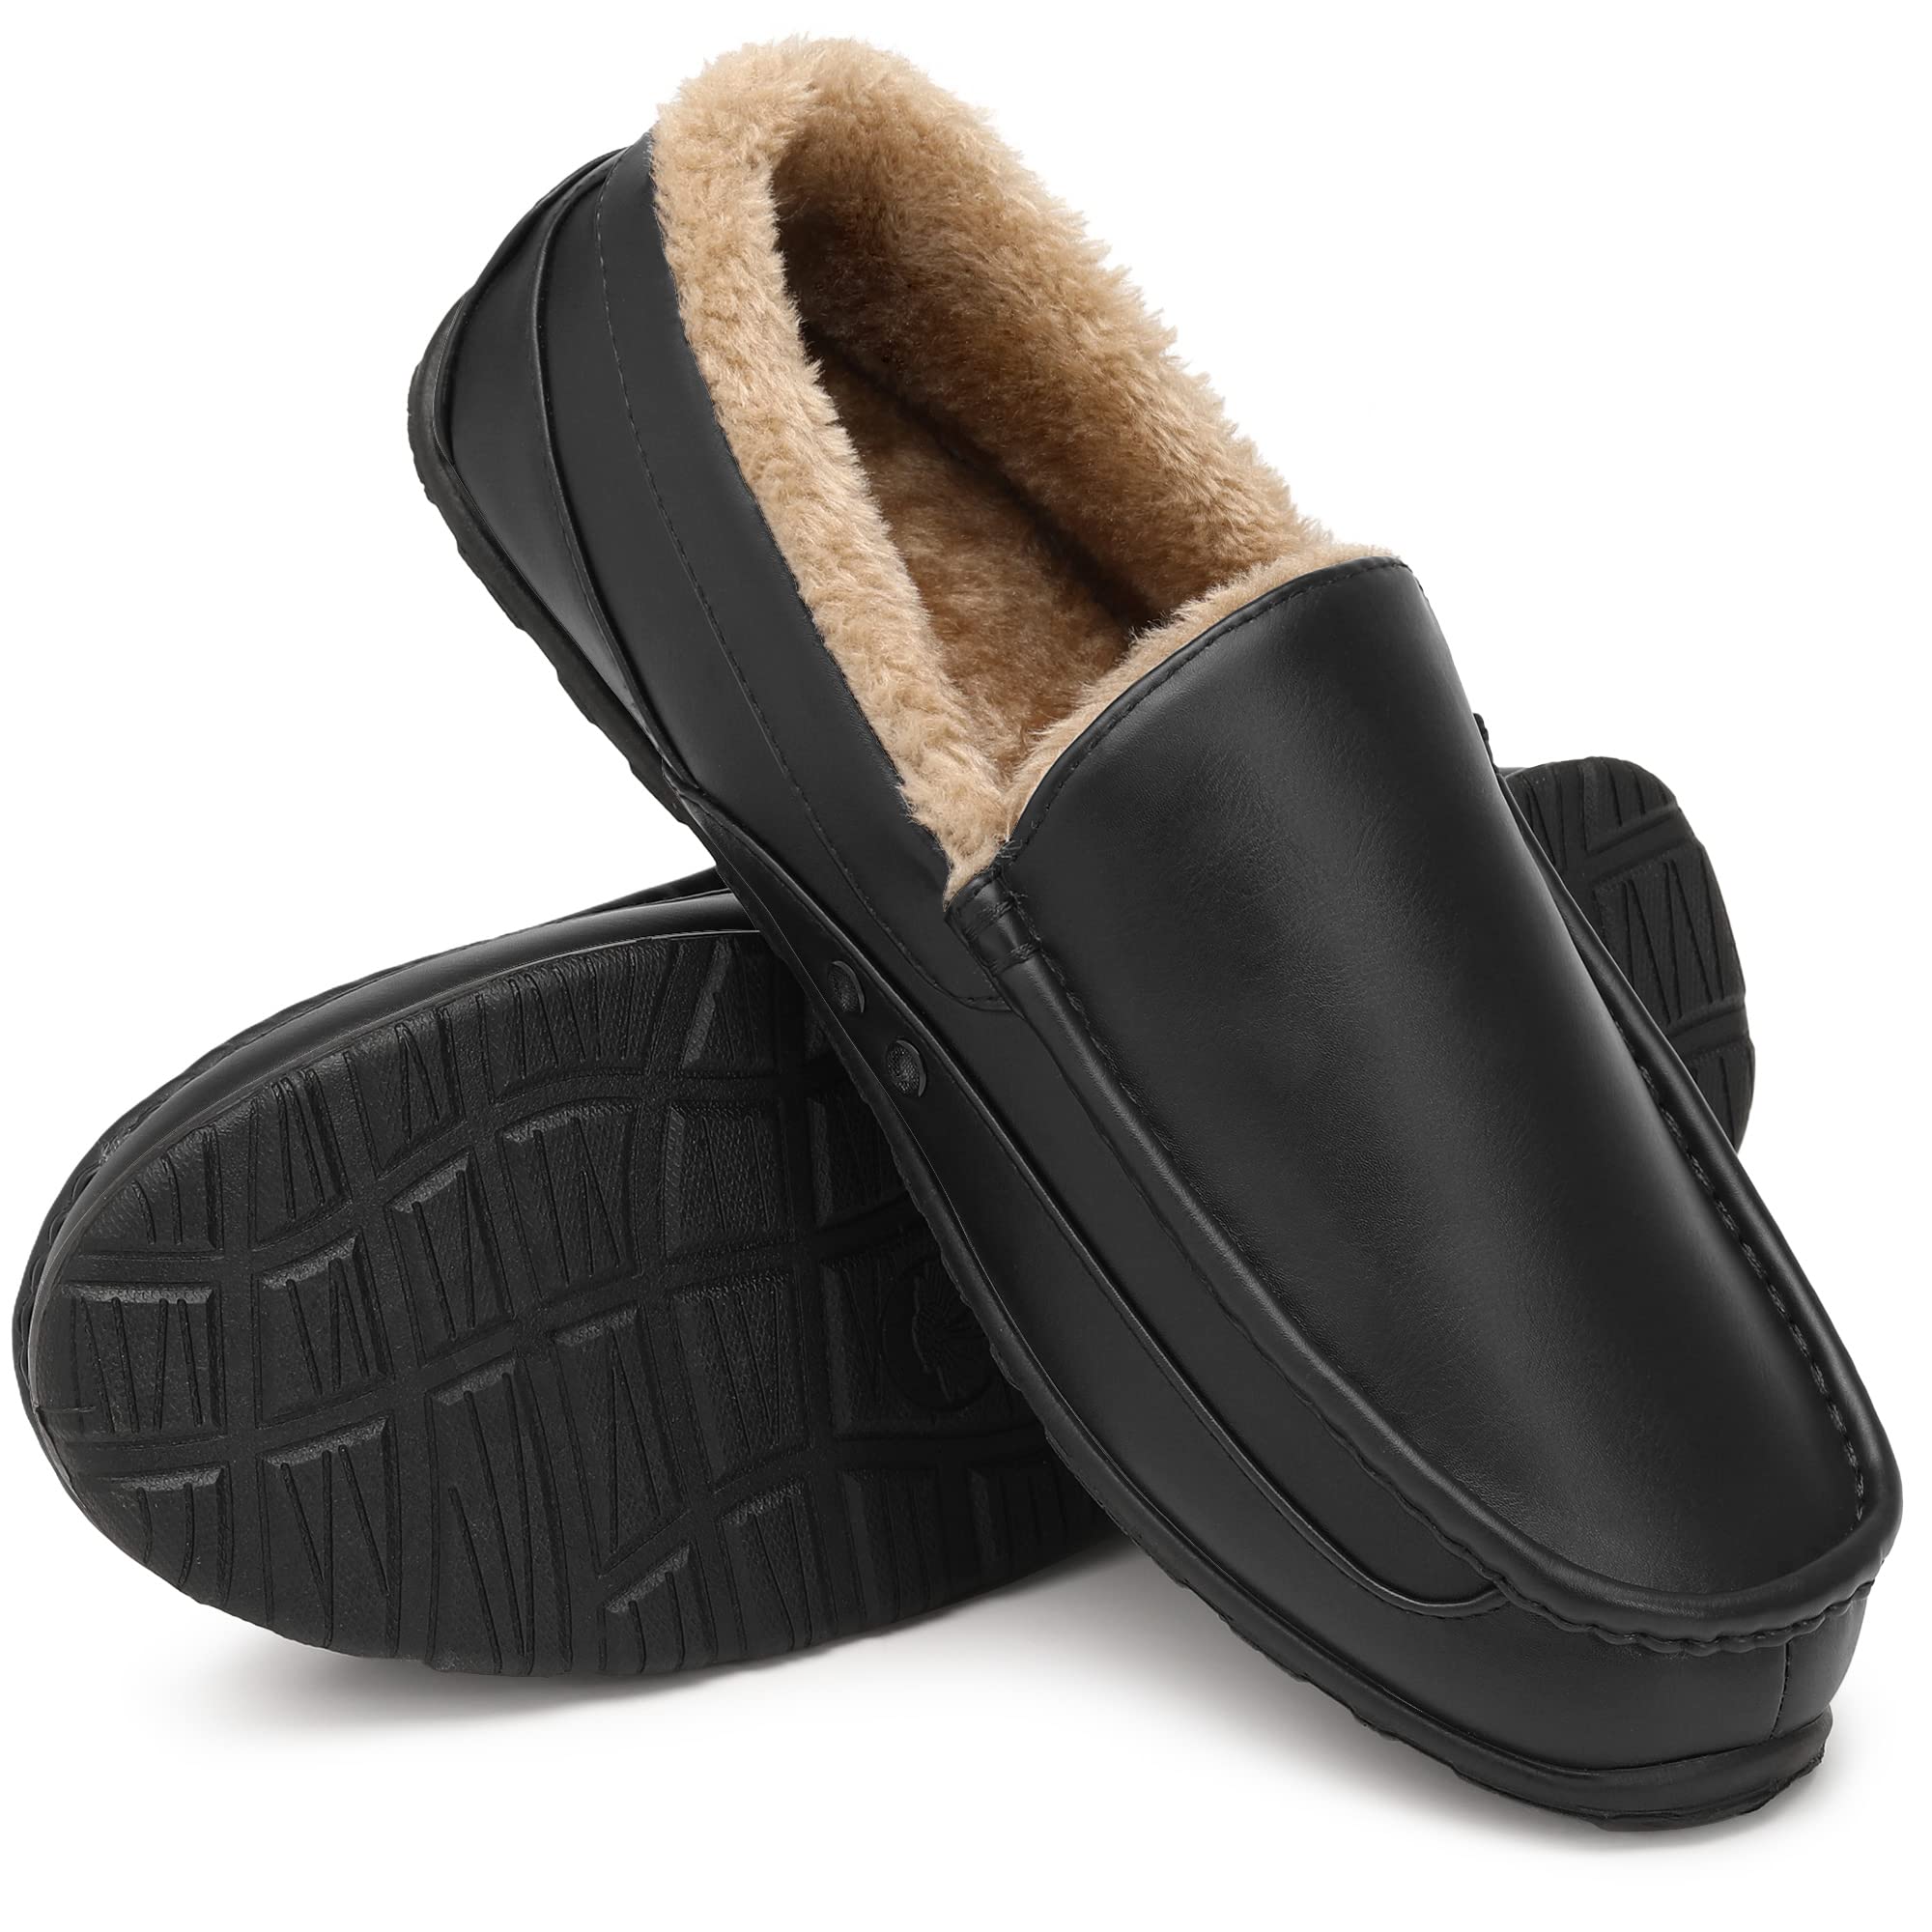 shoeslocker Mens Loafers Casual Slip On Driving Shoes Moccasins Fashion Slipper